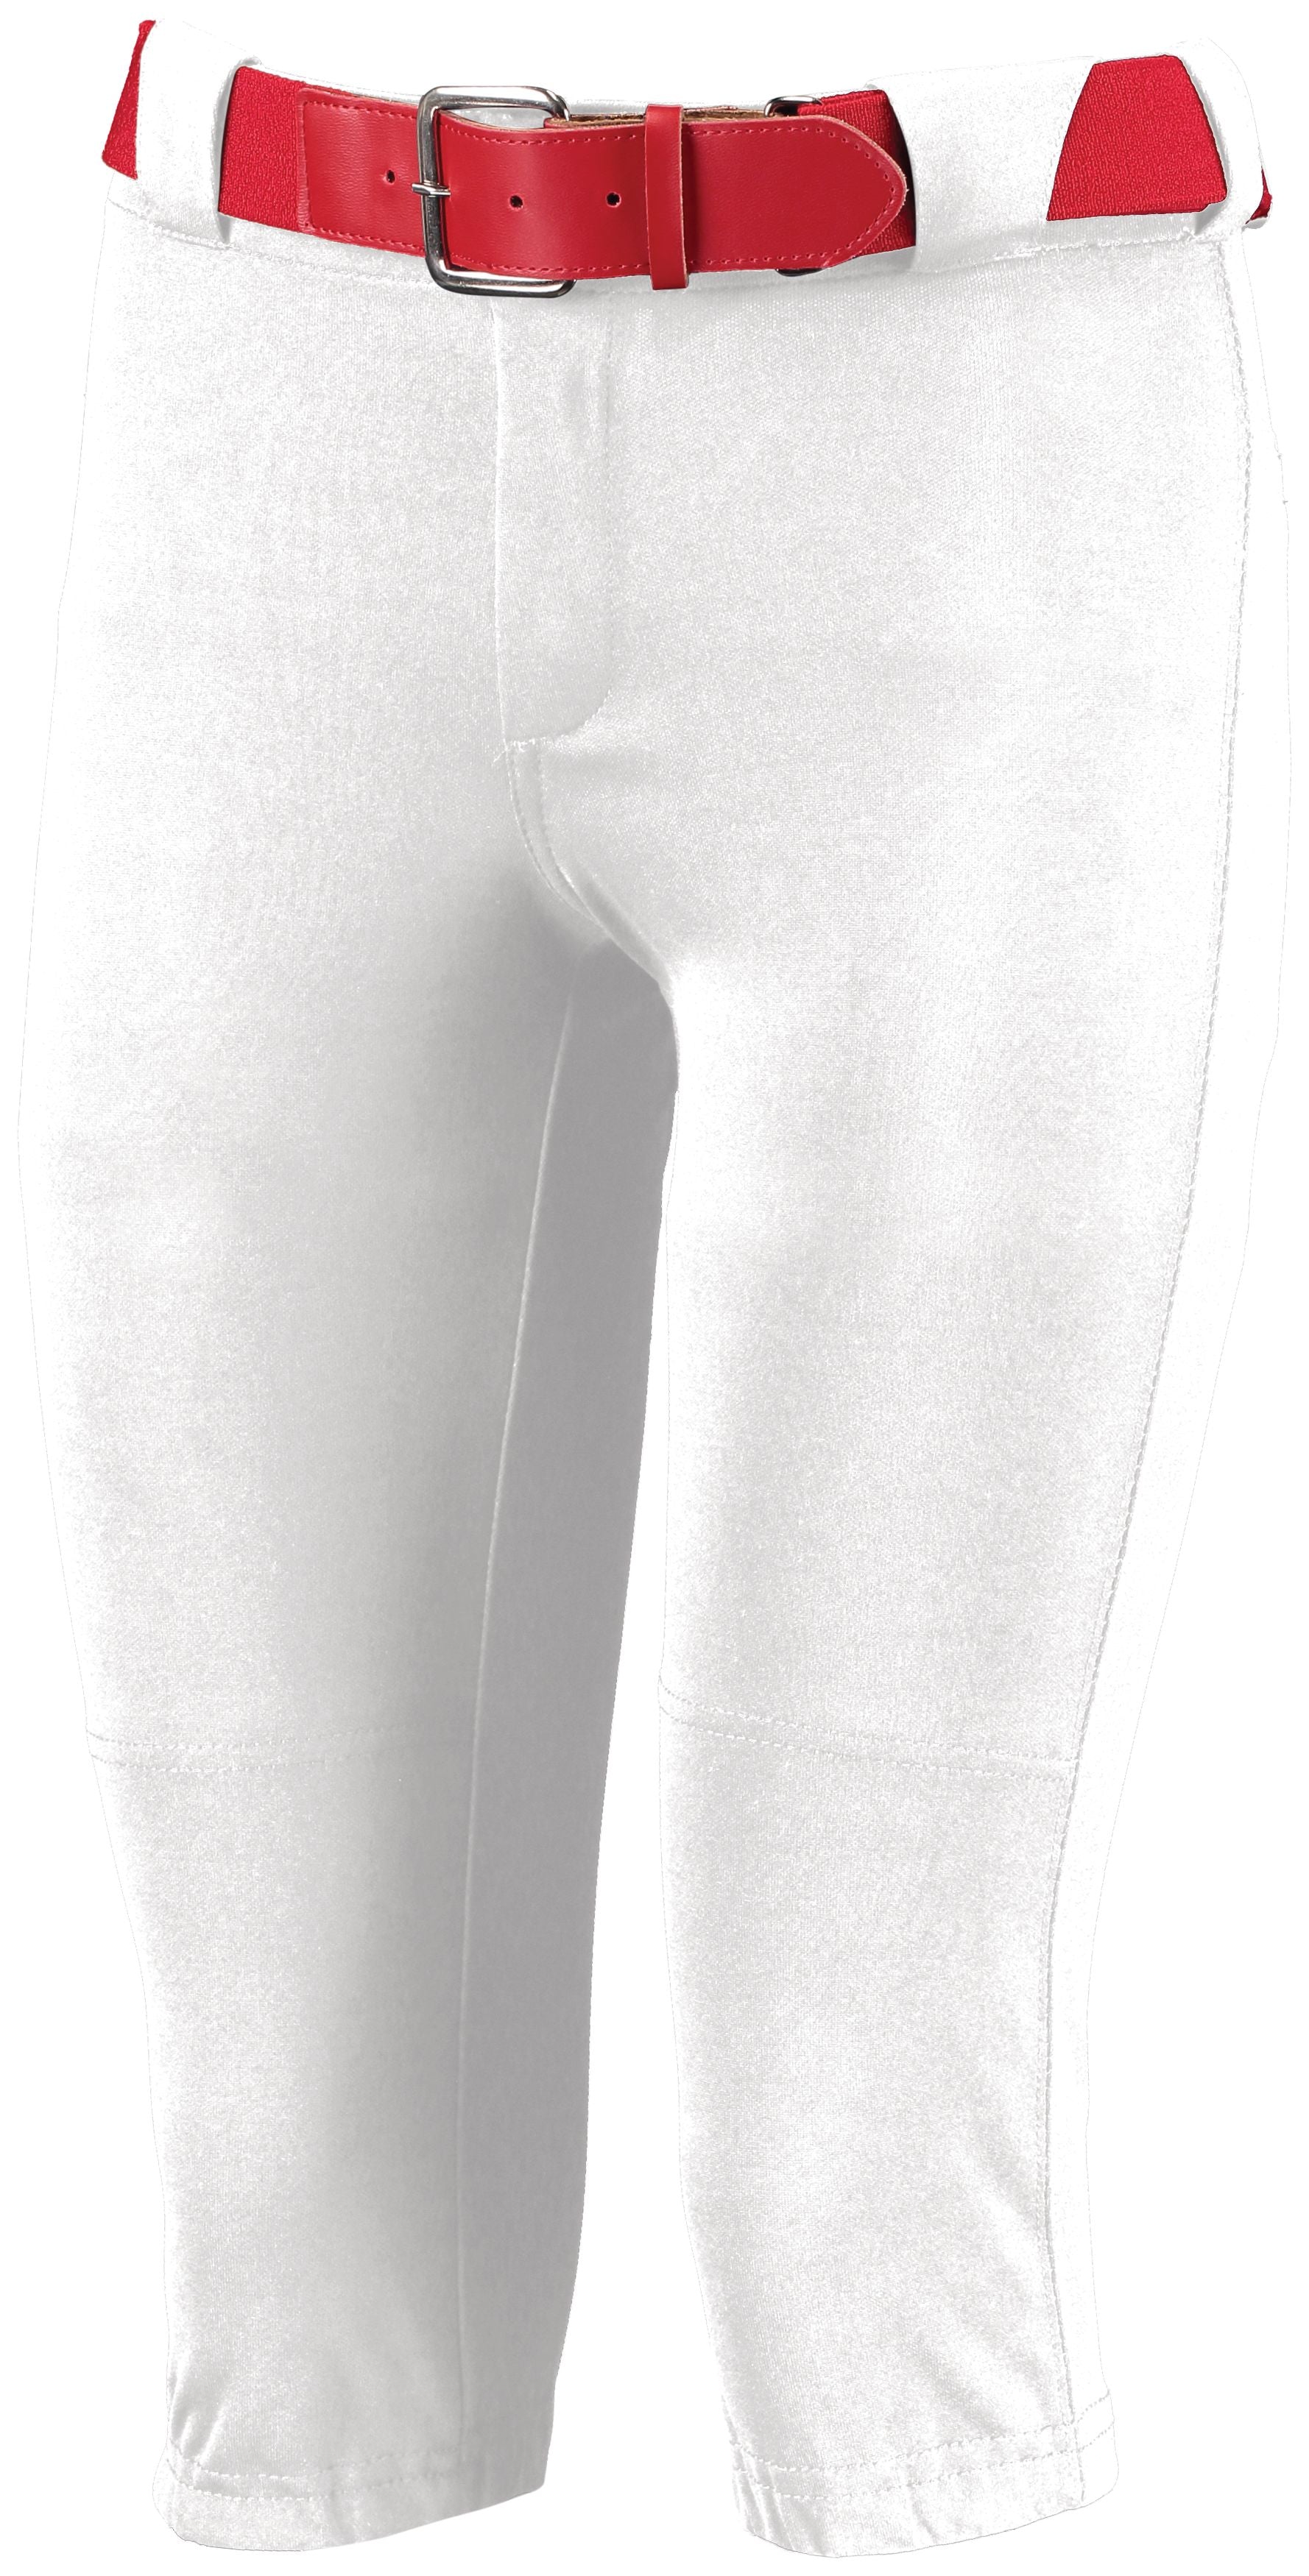 Russell Athletic Girls Low Rise Knicker Length Pant in White  -Part of the Girls, Softball, Russell-Athletic-Products product lines at KanaleyCreations.com